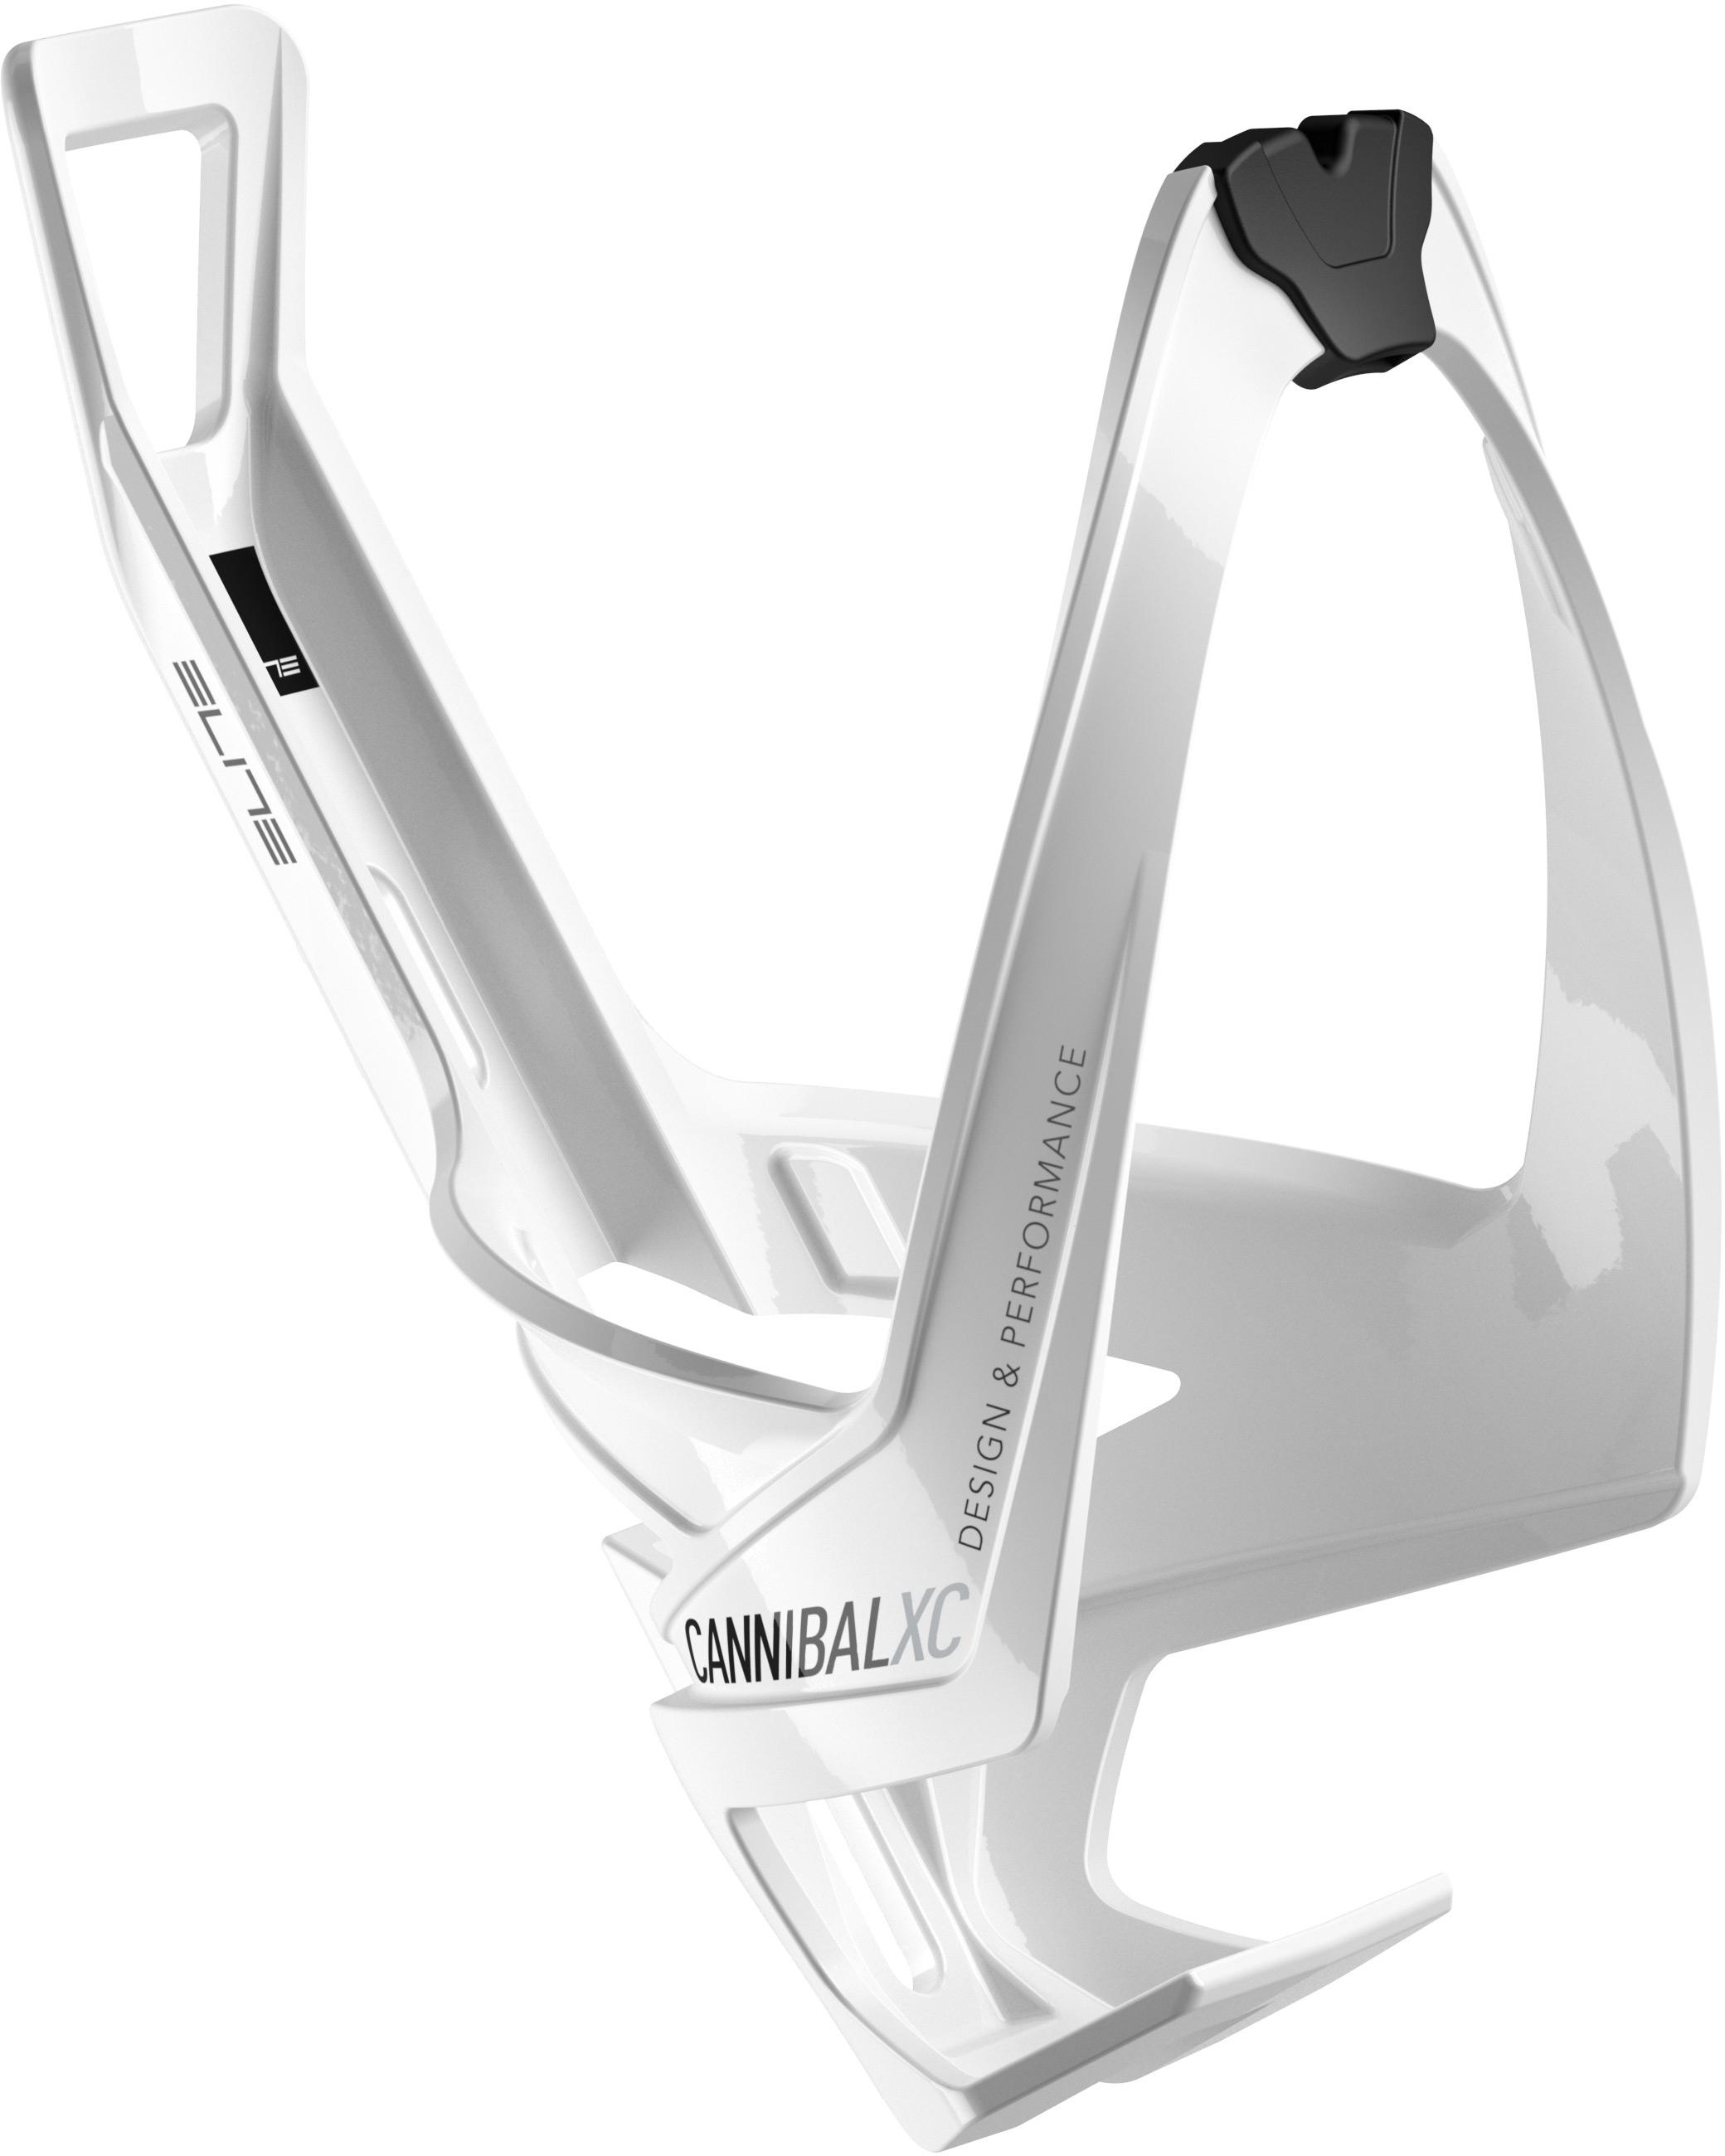 Cannibal Xc Bottle Cage Gloss White / Black